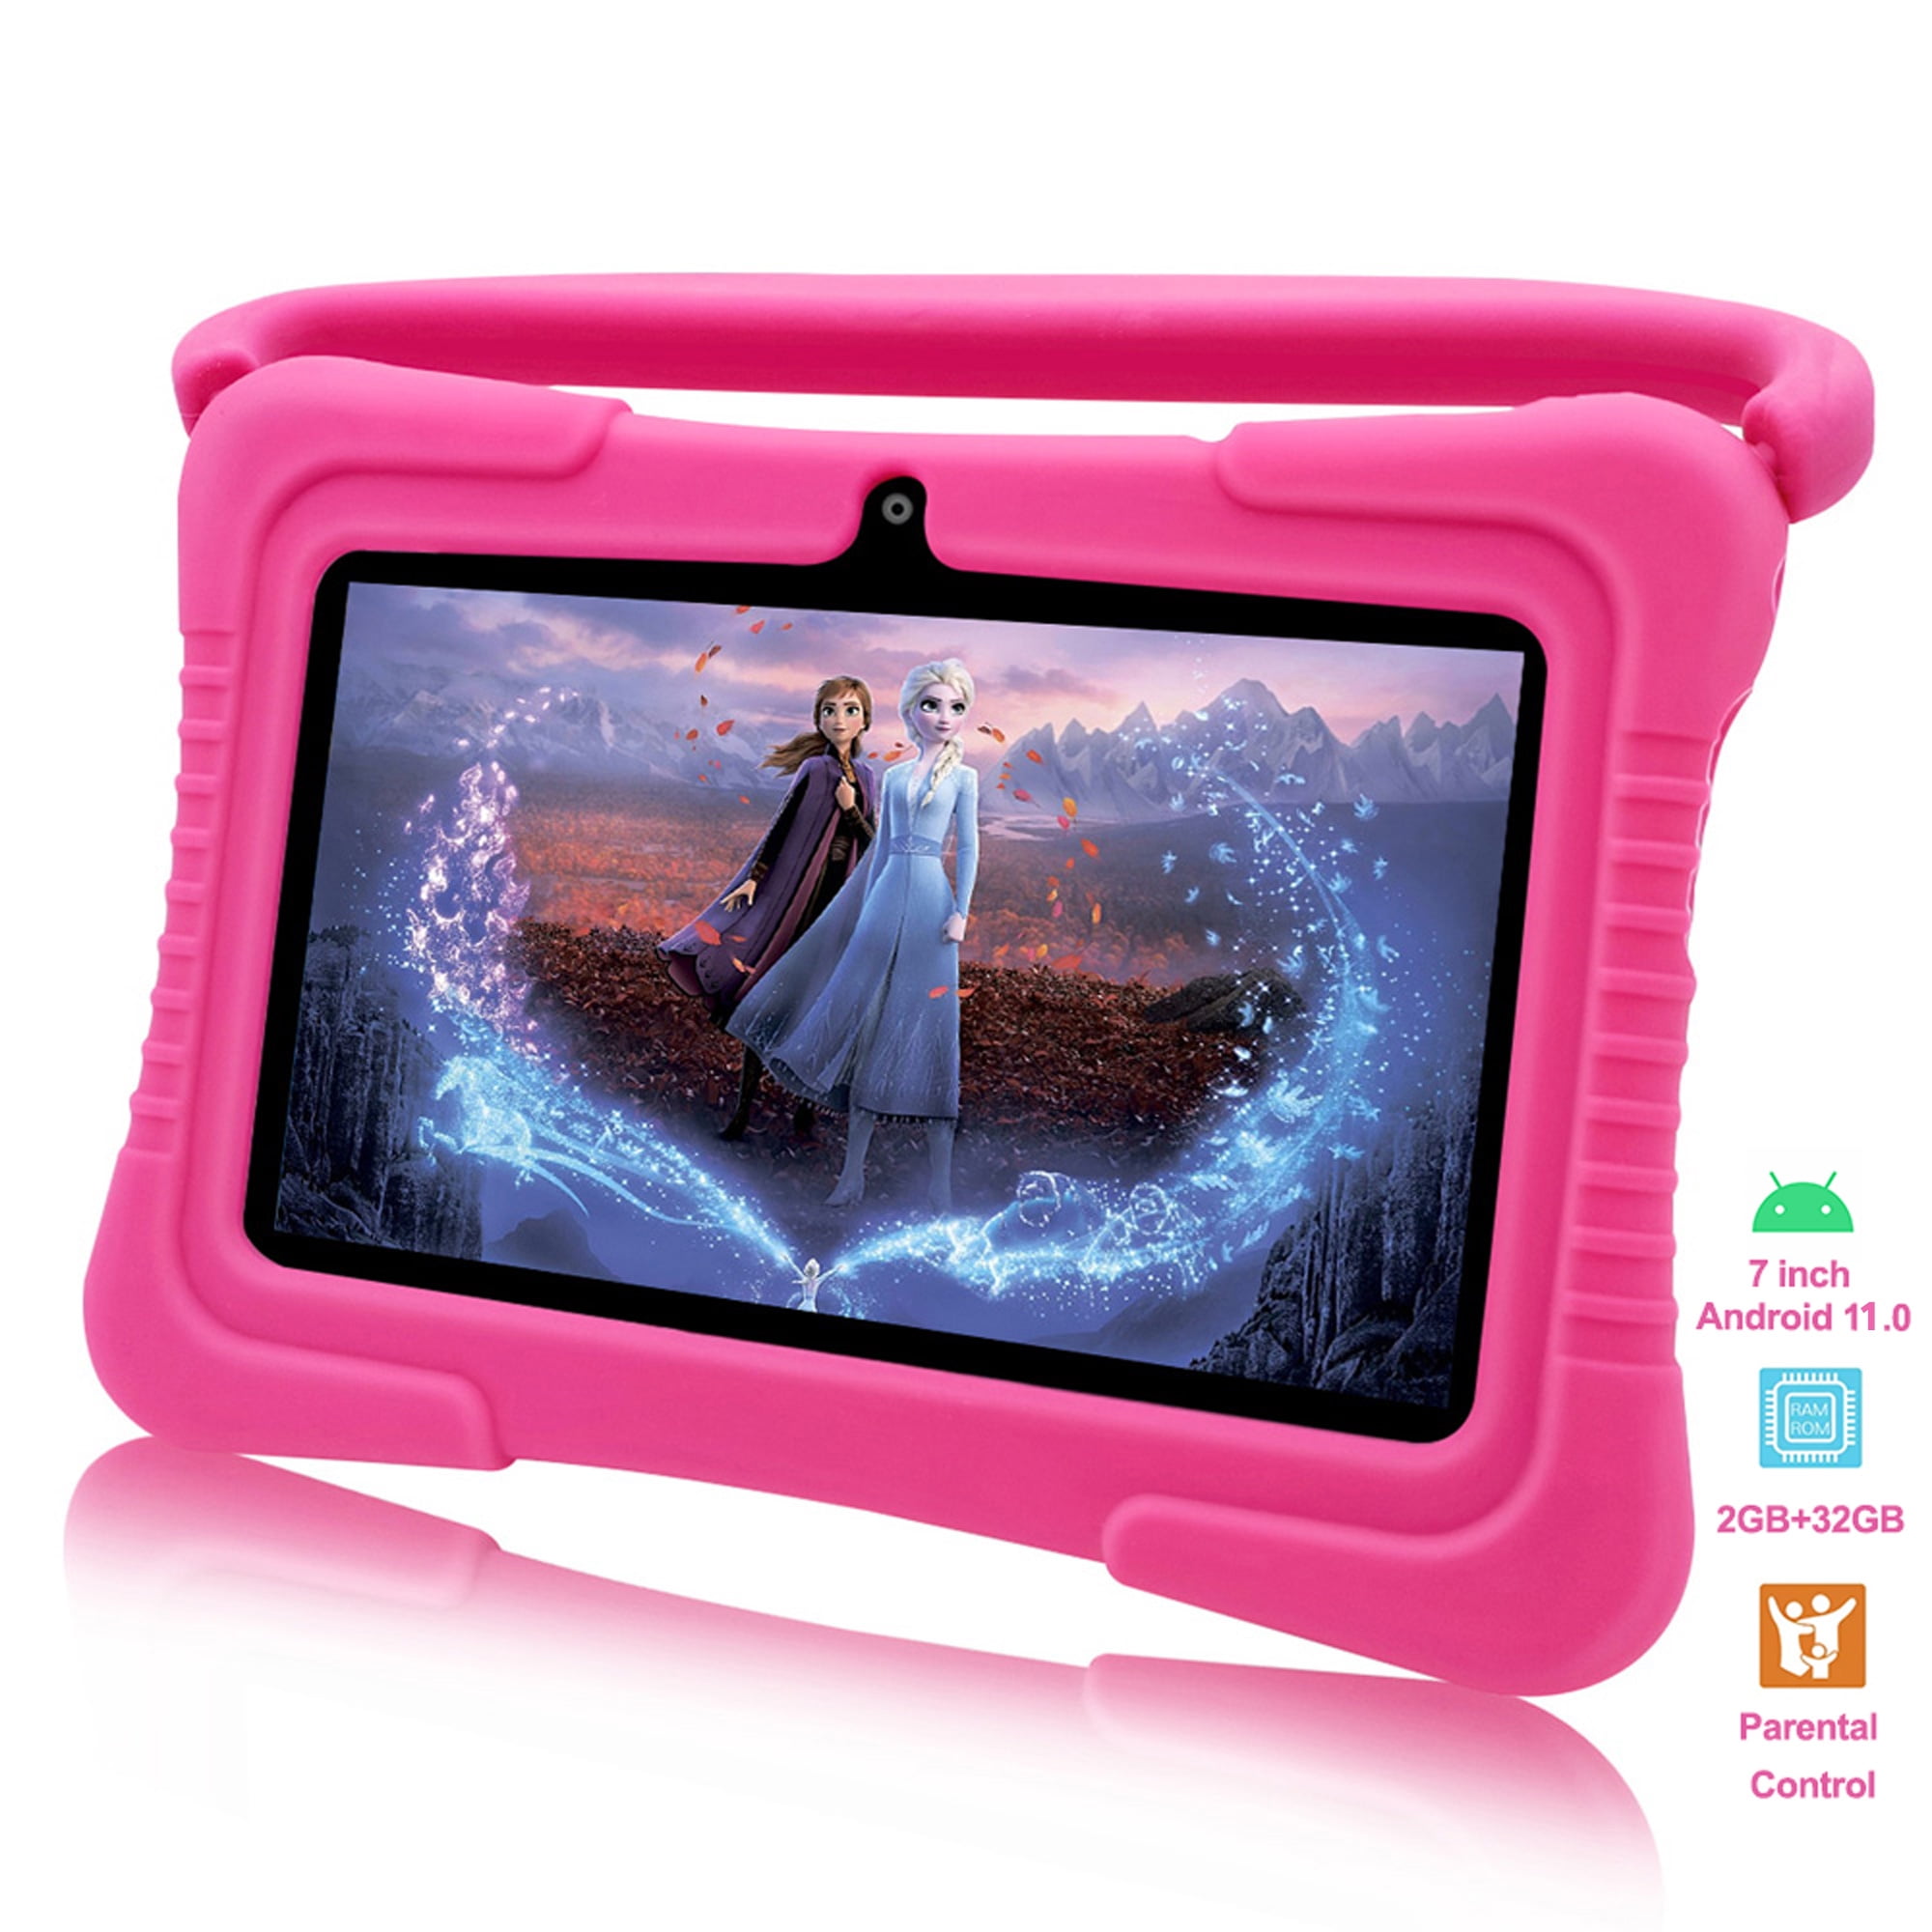 Tablet per bambini, Android 11.0,5MP+8MP,1280 x 800 IPS HD,2GB